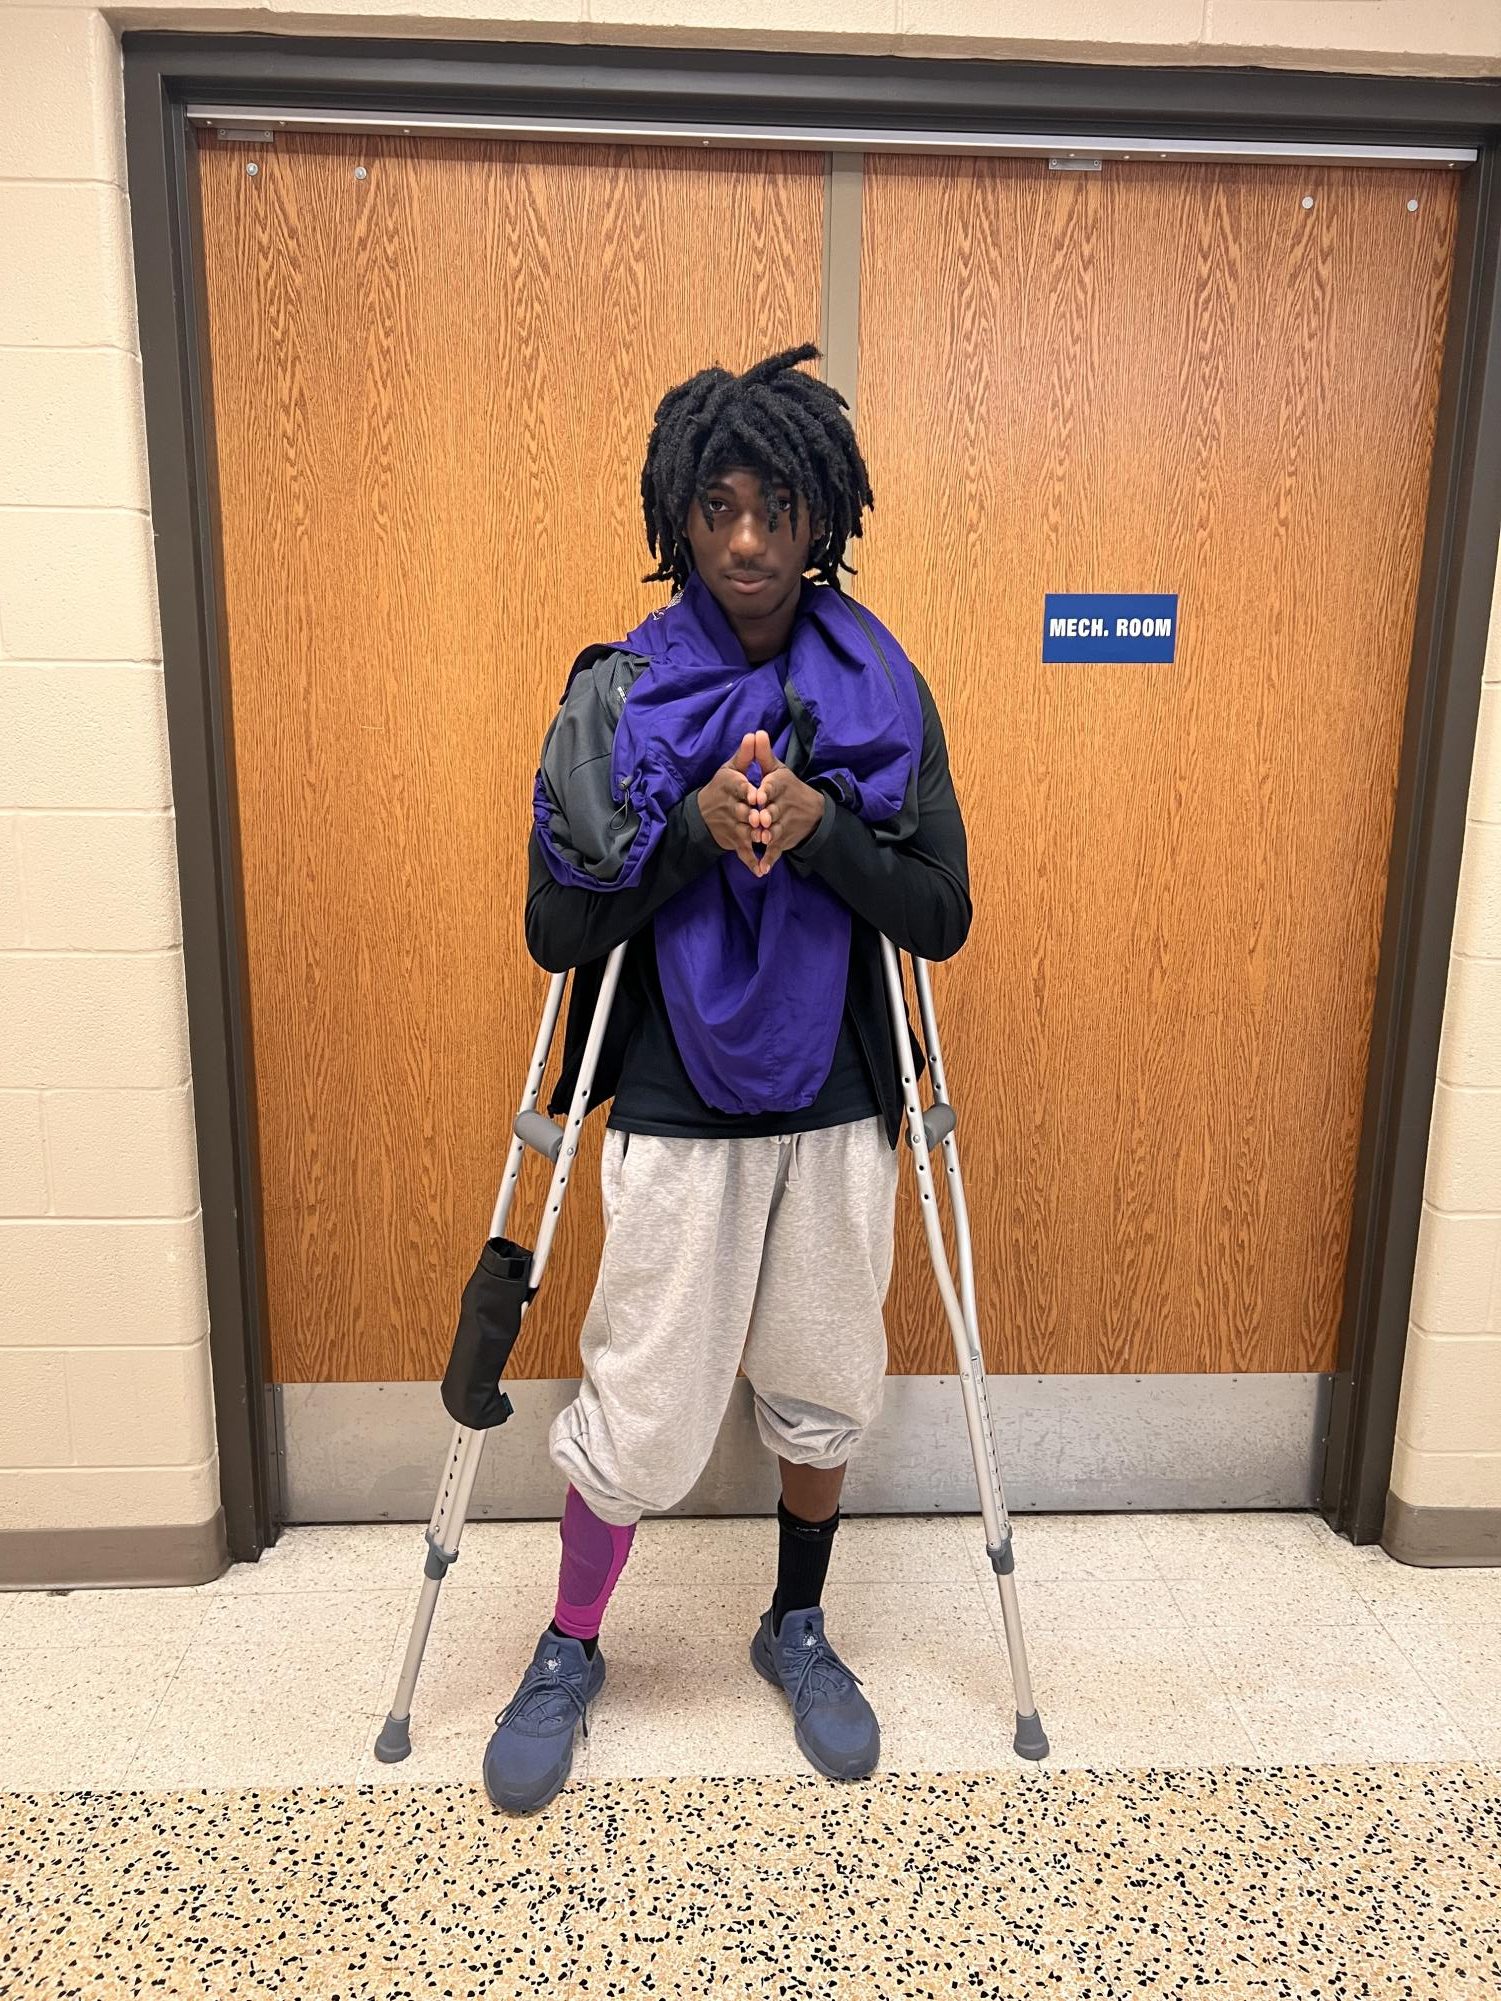 Soccer, track star starts long recovery from grisly injury